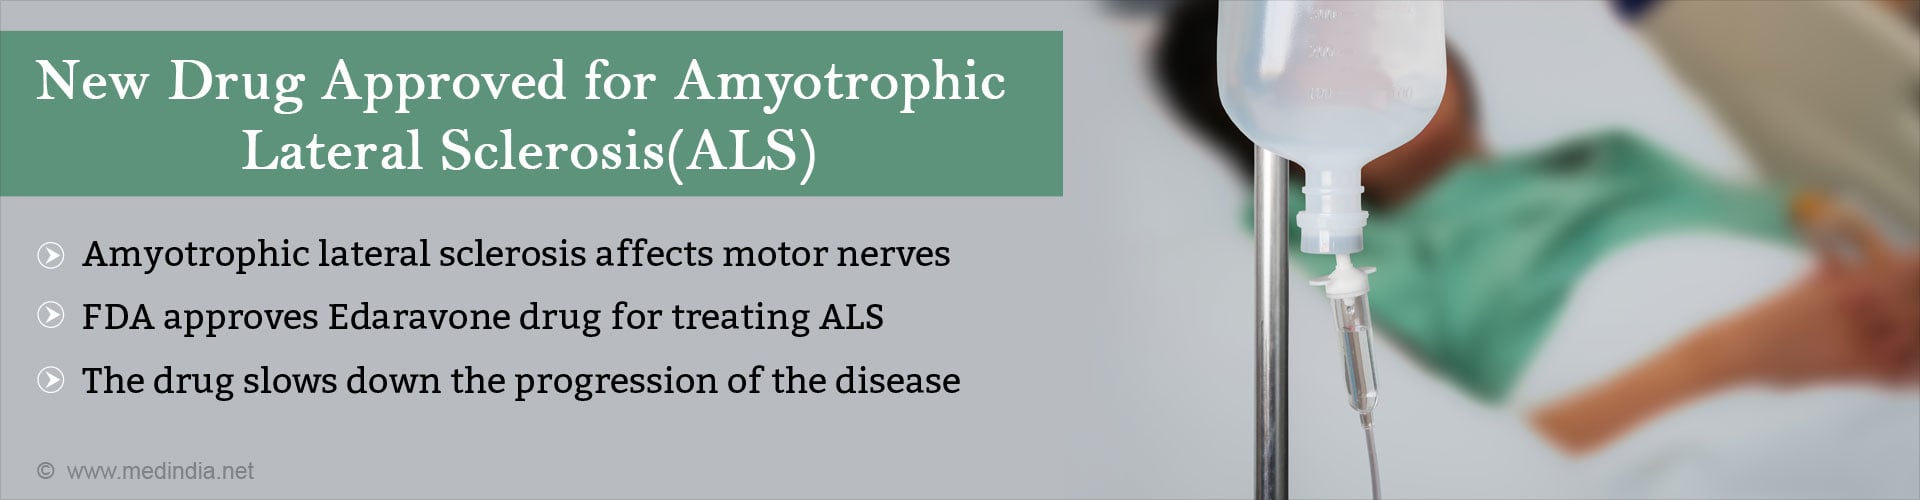 New drug approved for amyotrophic lateral sclerosis (ALS)
- ALS affects motor nerves
- FDA approves Edaravone drug for treating ALS
- The drug slows down the progession of the disease